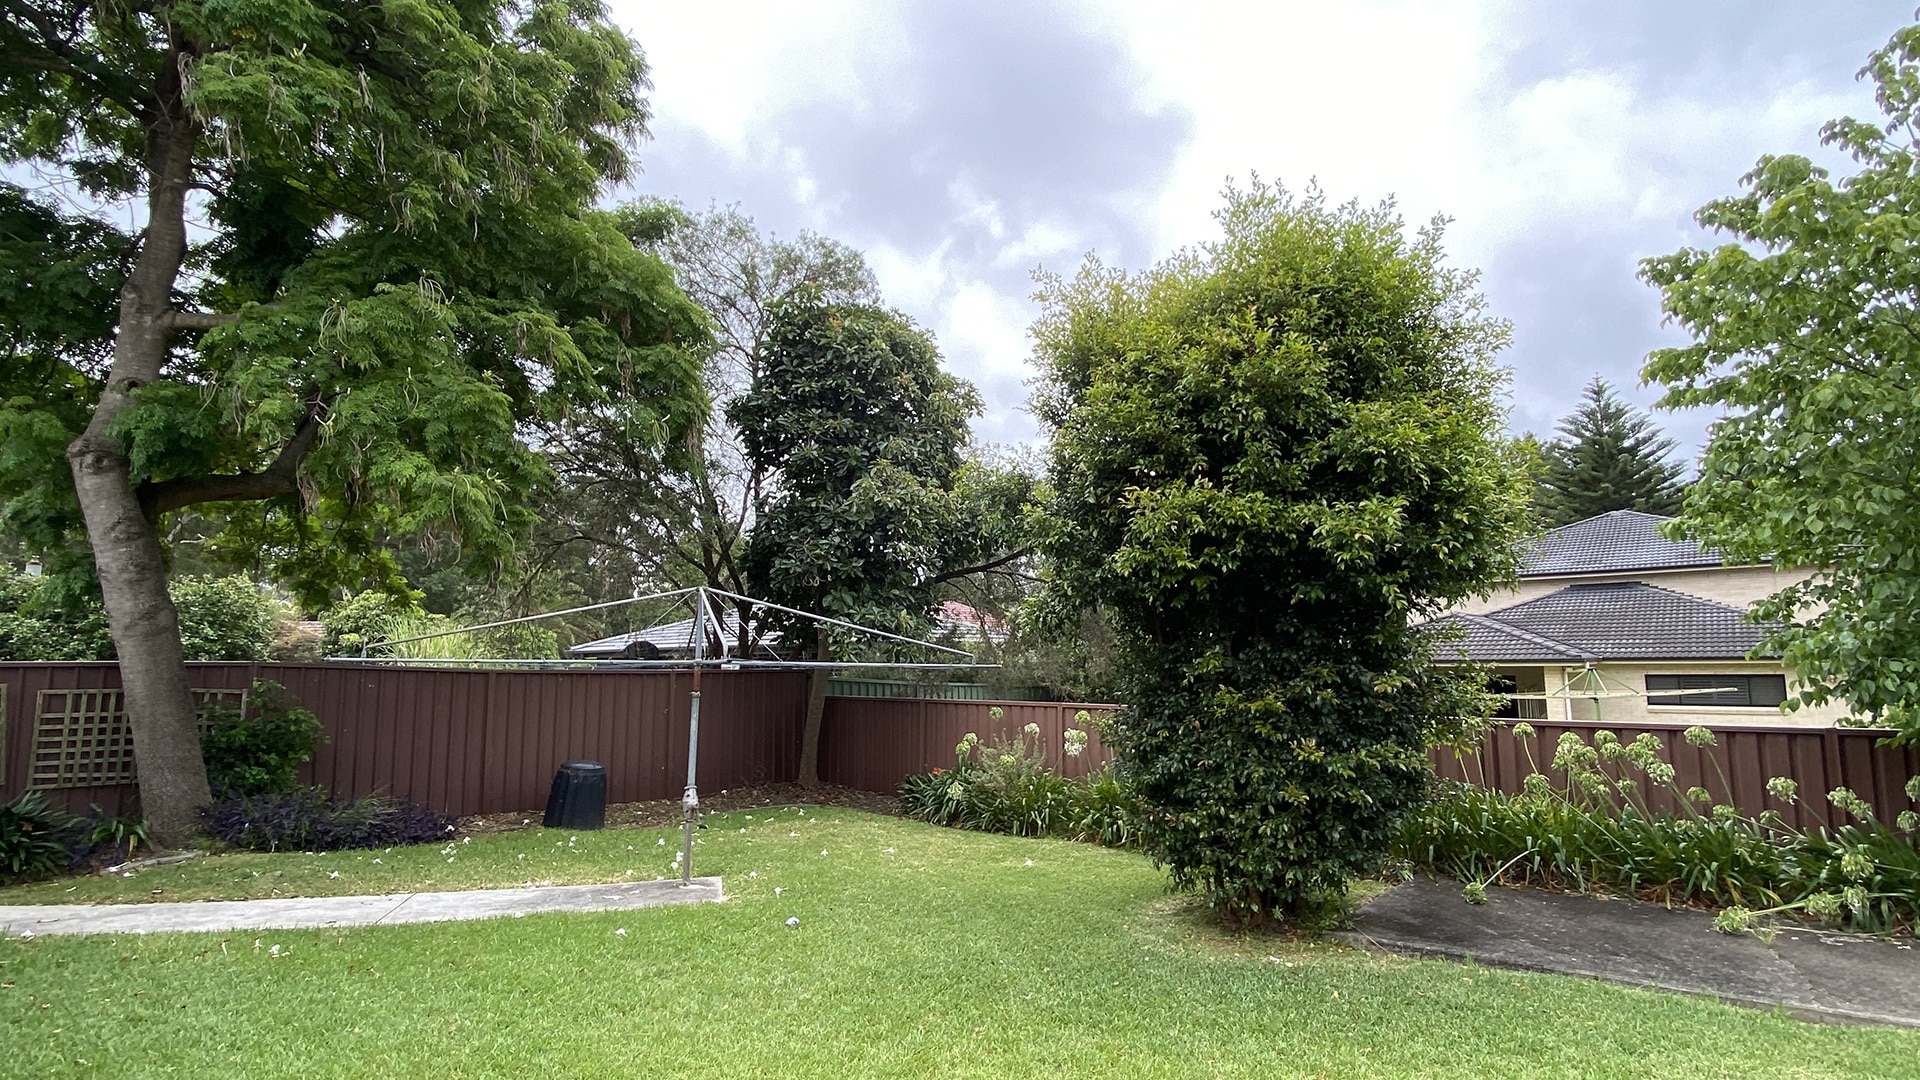 Fenced back garden with large grassed areas, trees and a clothesline at the Marsfield 2 property